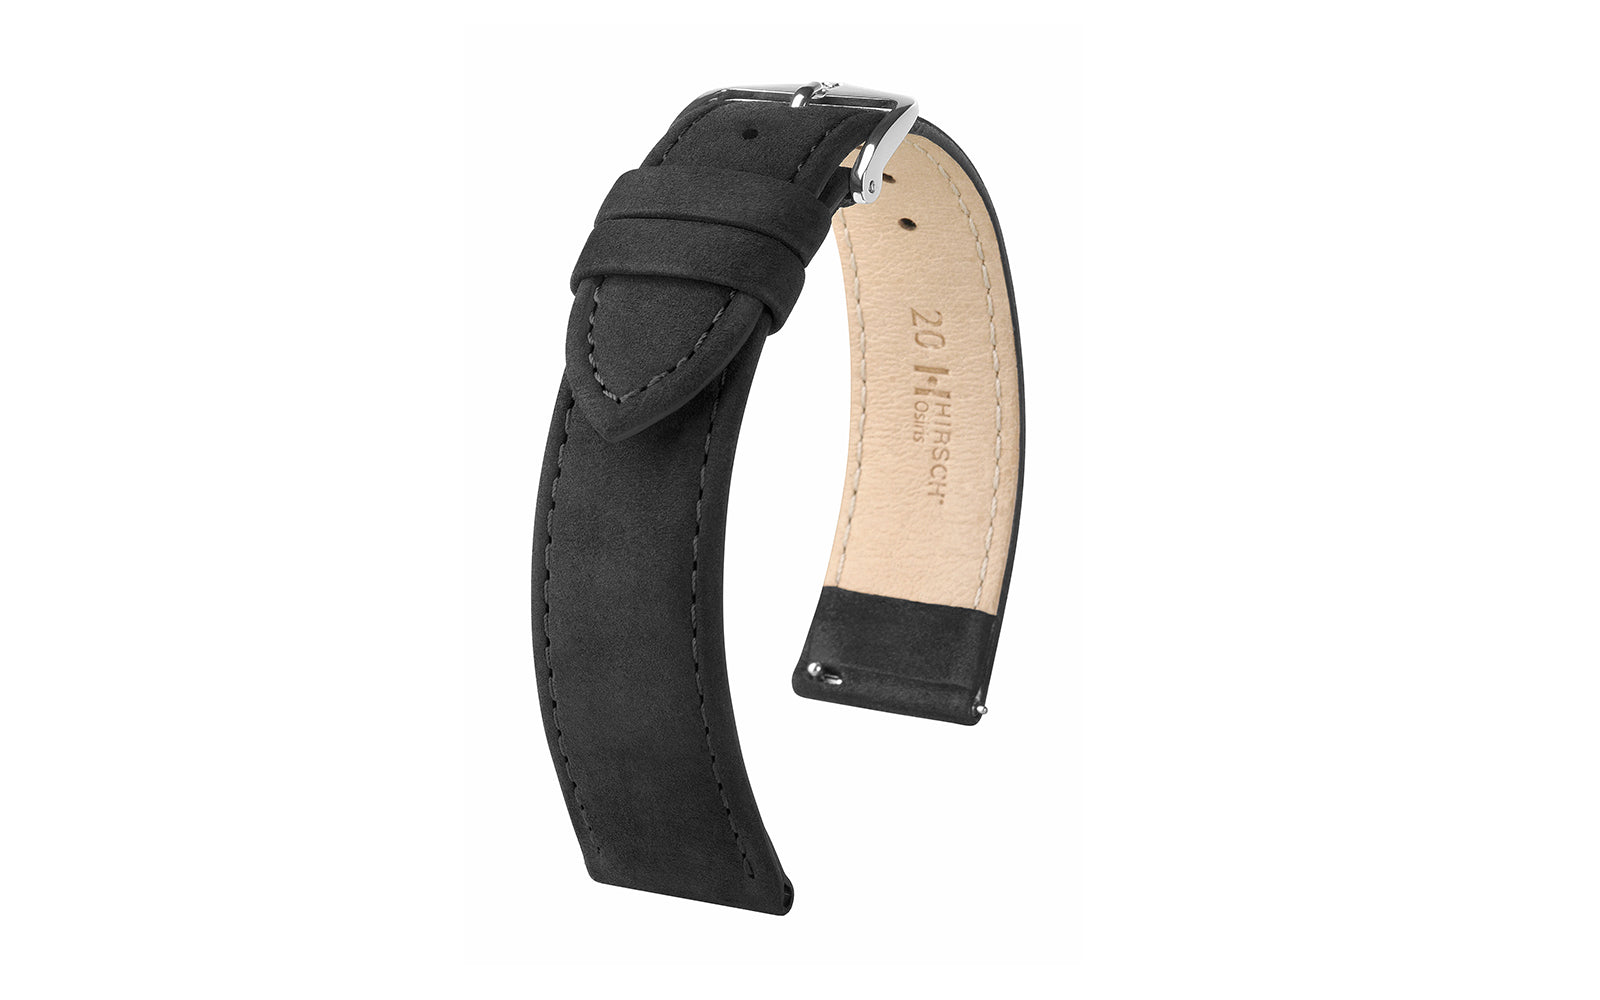 Vintage strap - Leather watch band - Calf suede (multiple colors